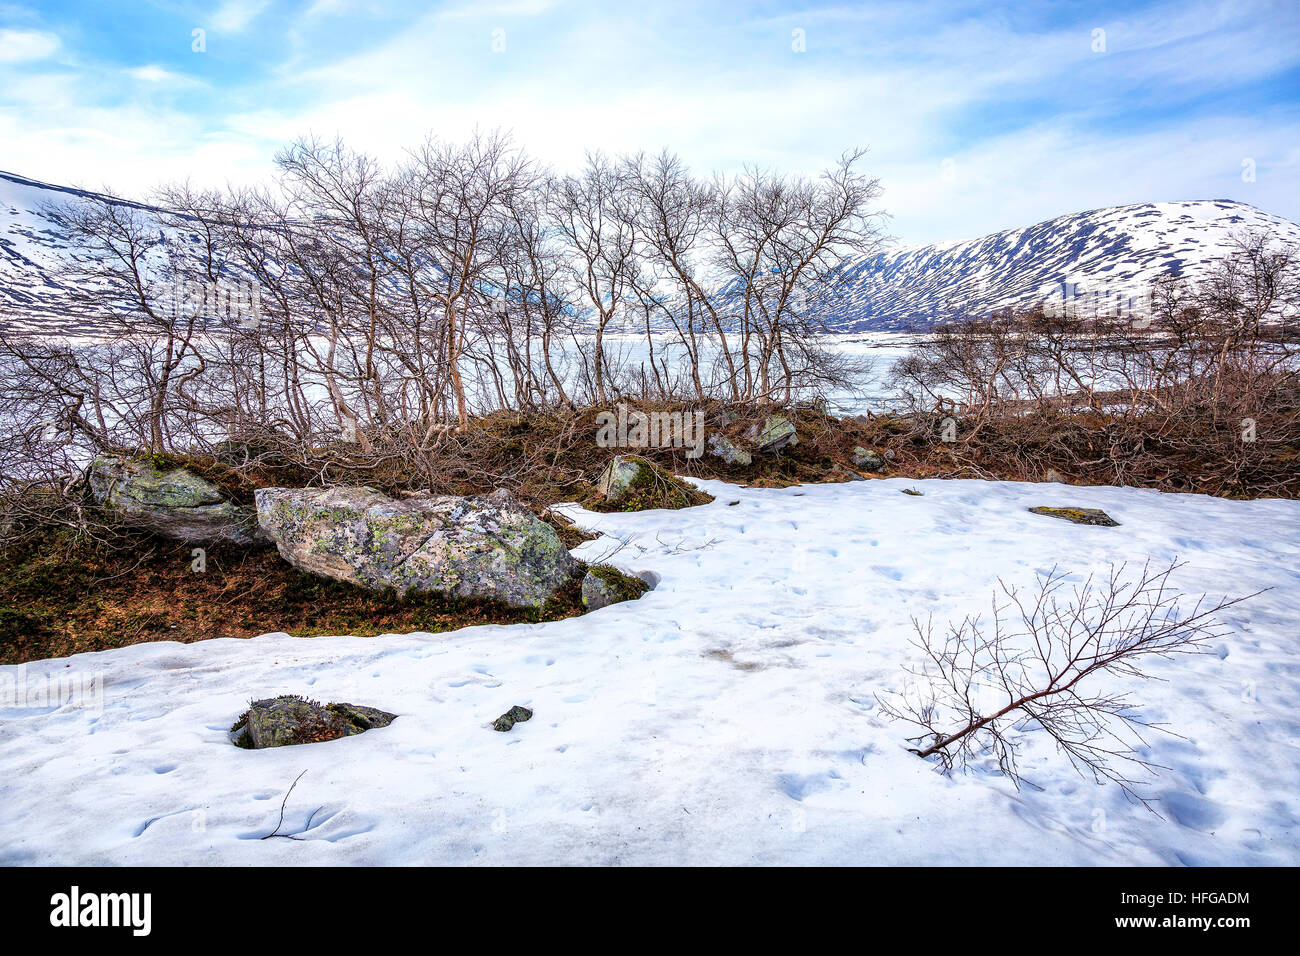 The ice breaking up on the lake in Fjordane, Norway in Spring. Isolated pockets of ice remain on the land. Stock Photo